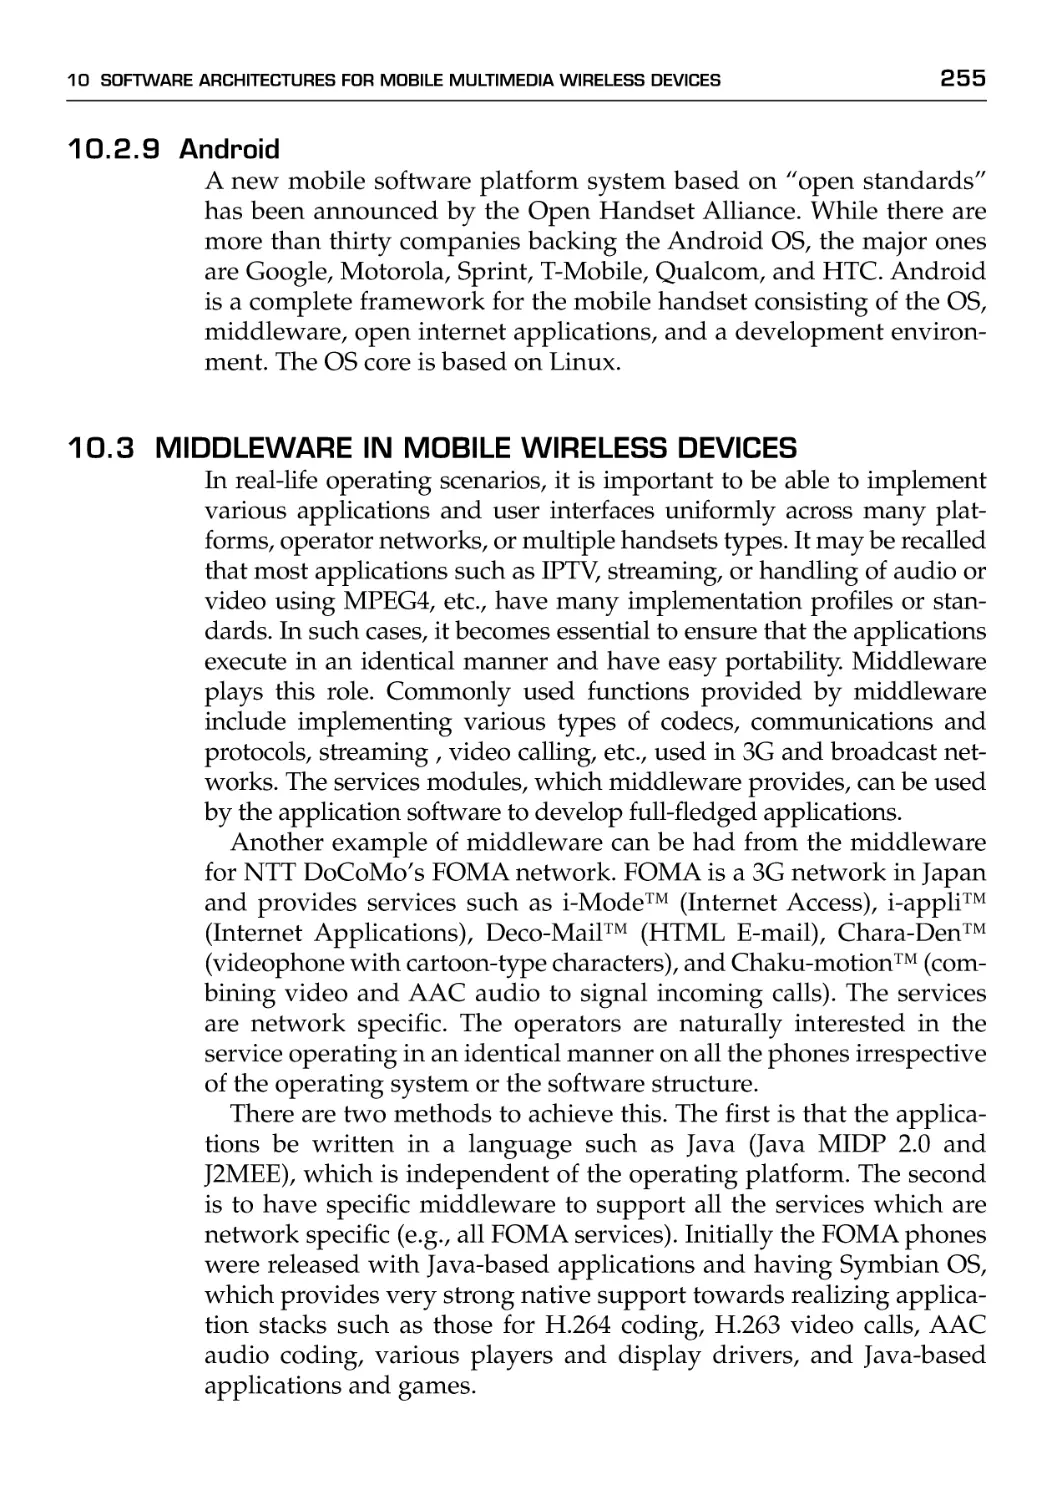 10.3 Middleware in Mobile Wireless Devices